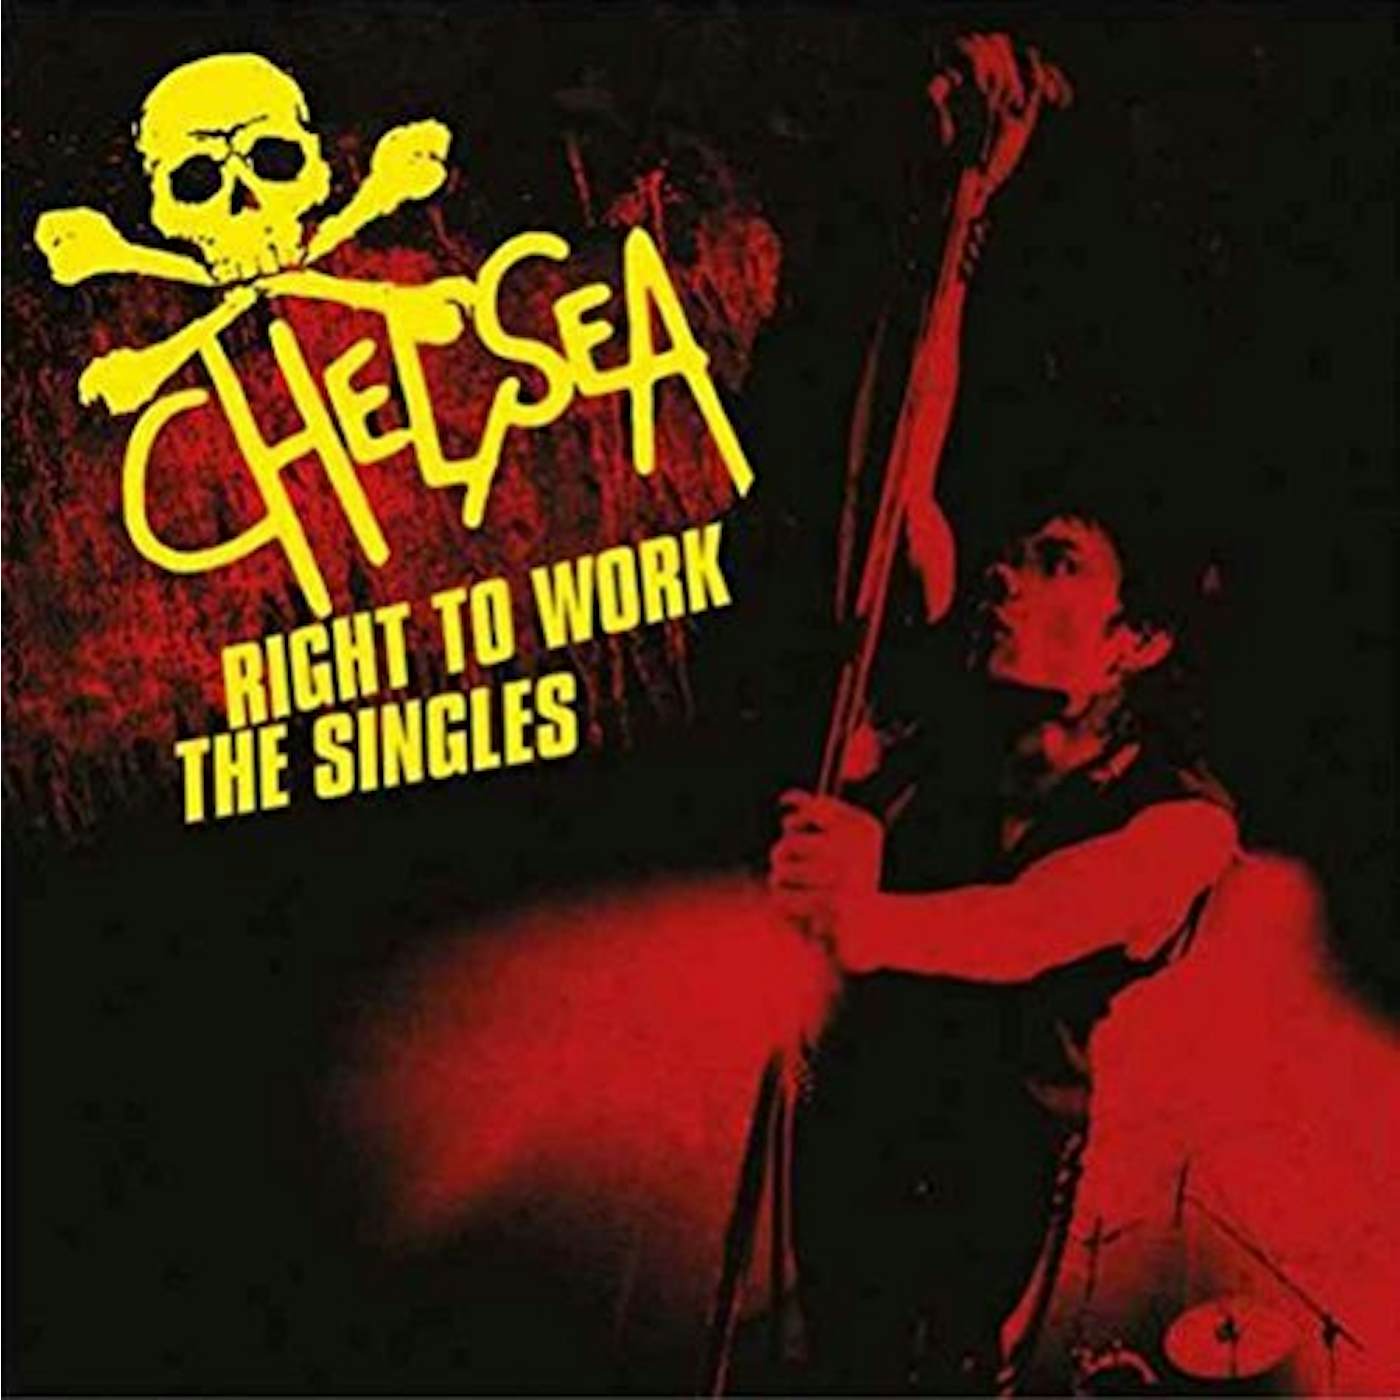 Chelsea RIGHT TO WORK: SINGLES CD